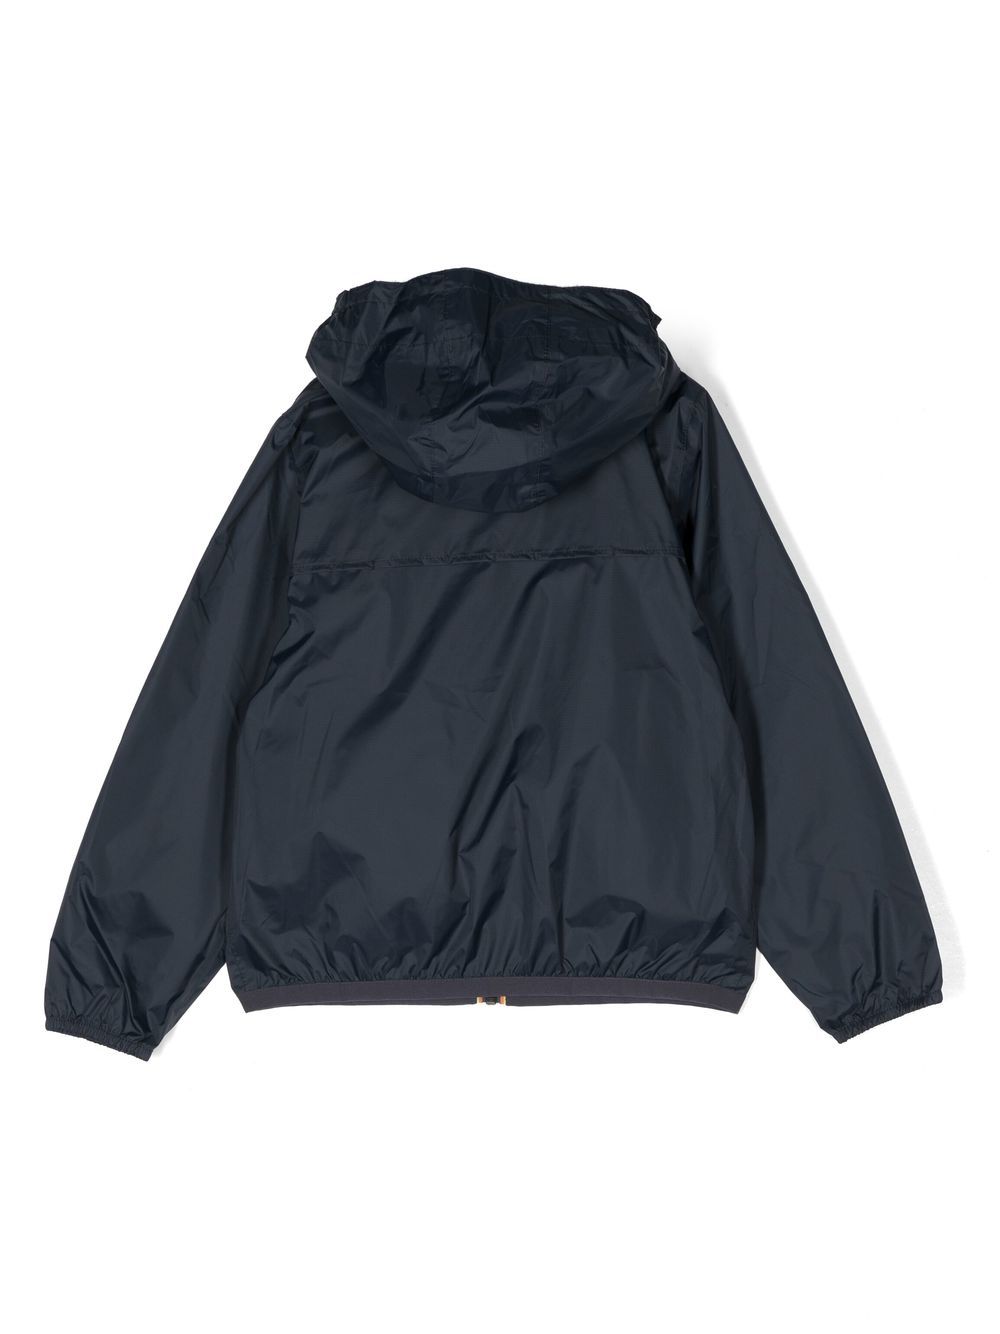 Blue jacket for boys with logo